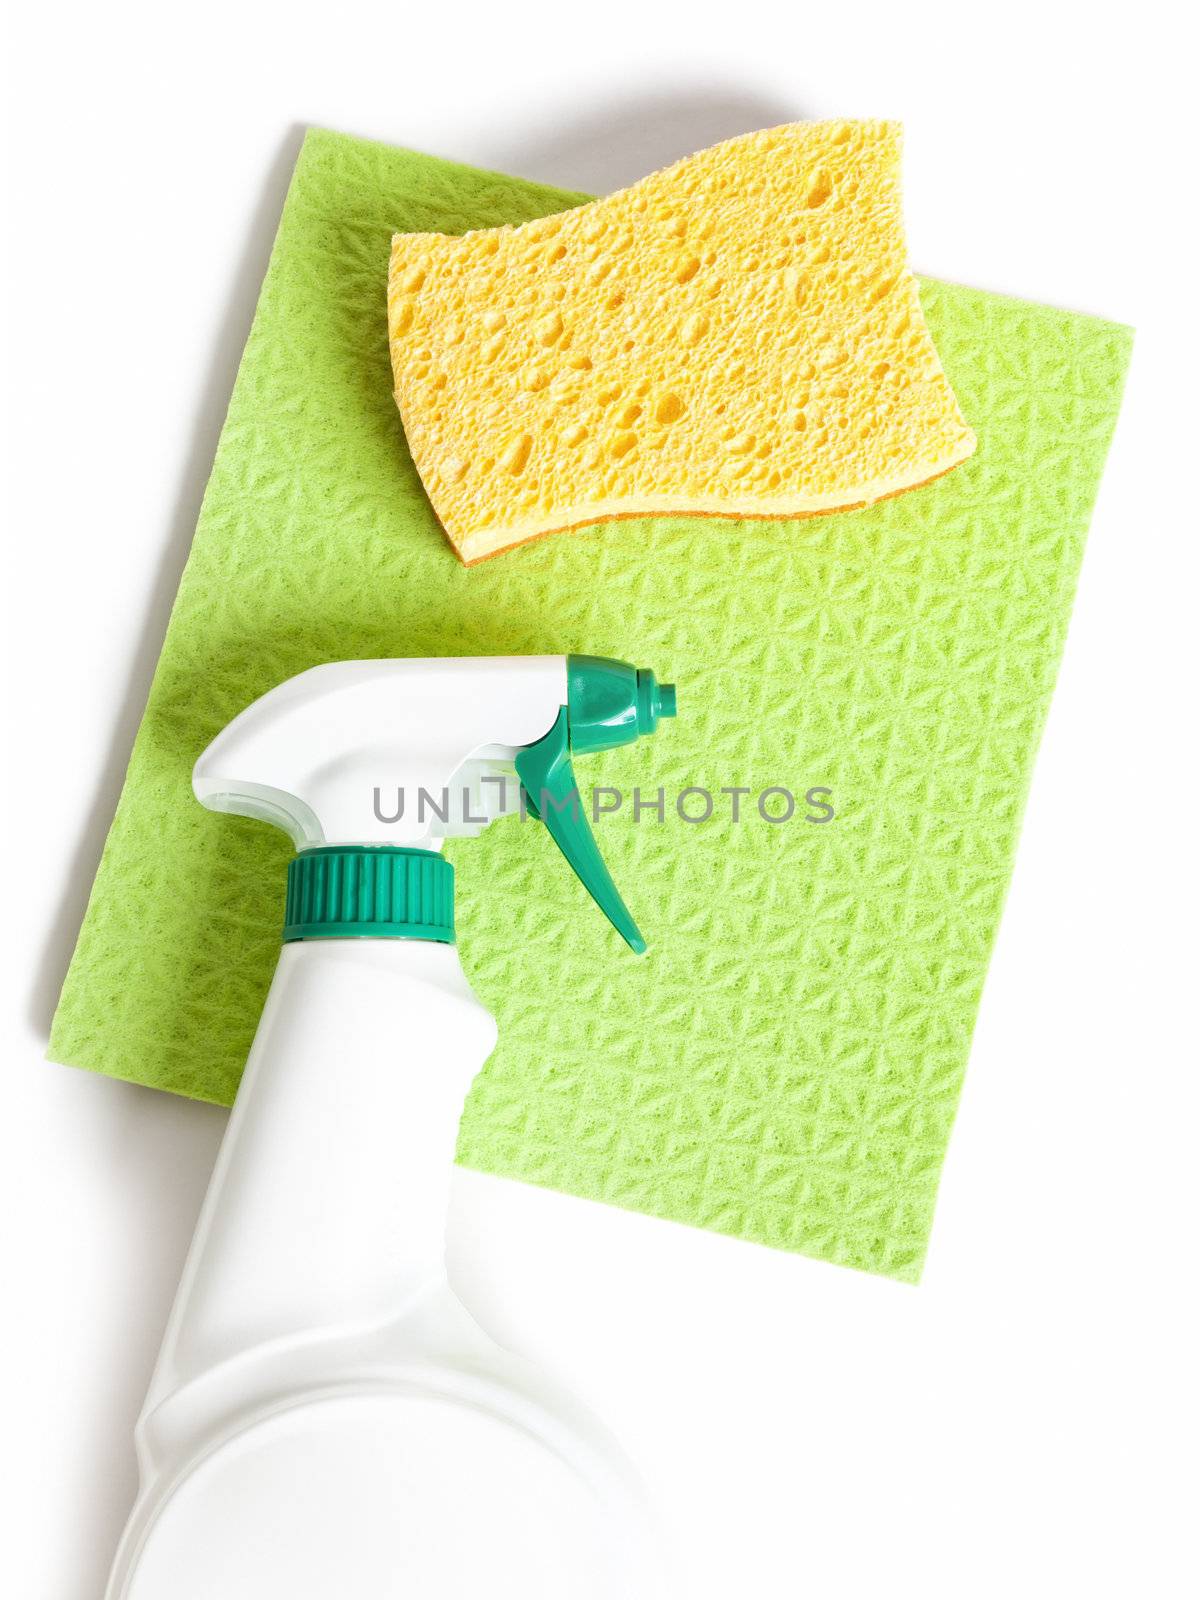 An image of a sponge and some cleaning